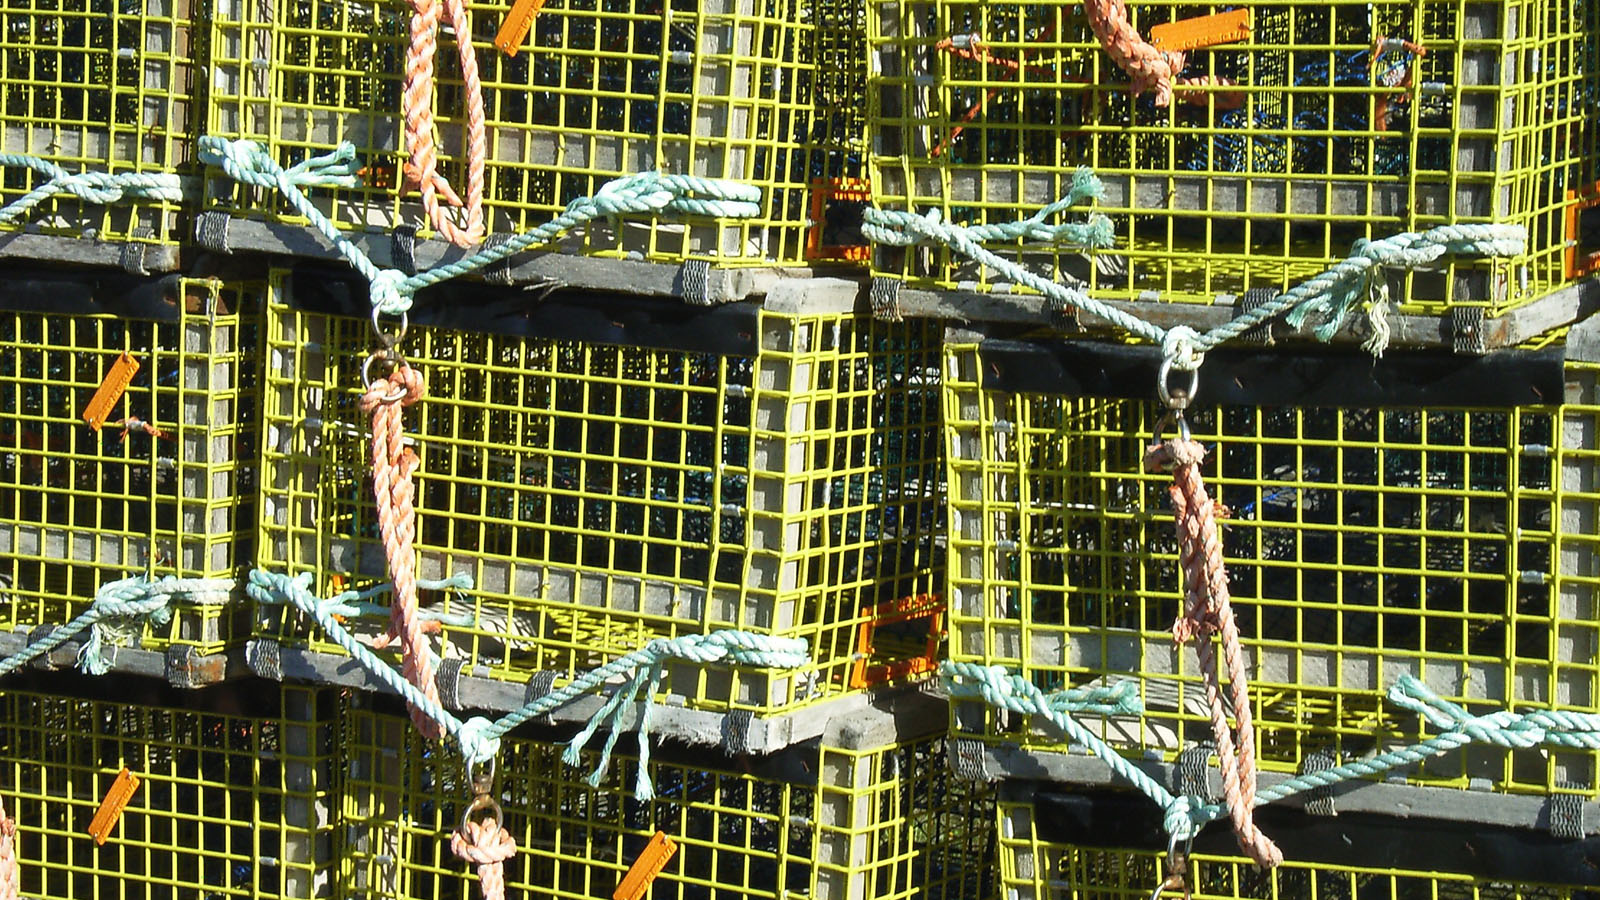 Some Interesting Creatures that get Stuck in Lobster Traps